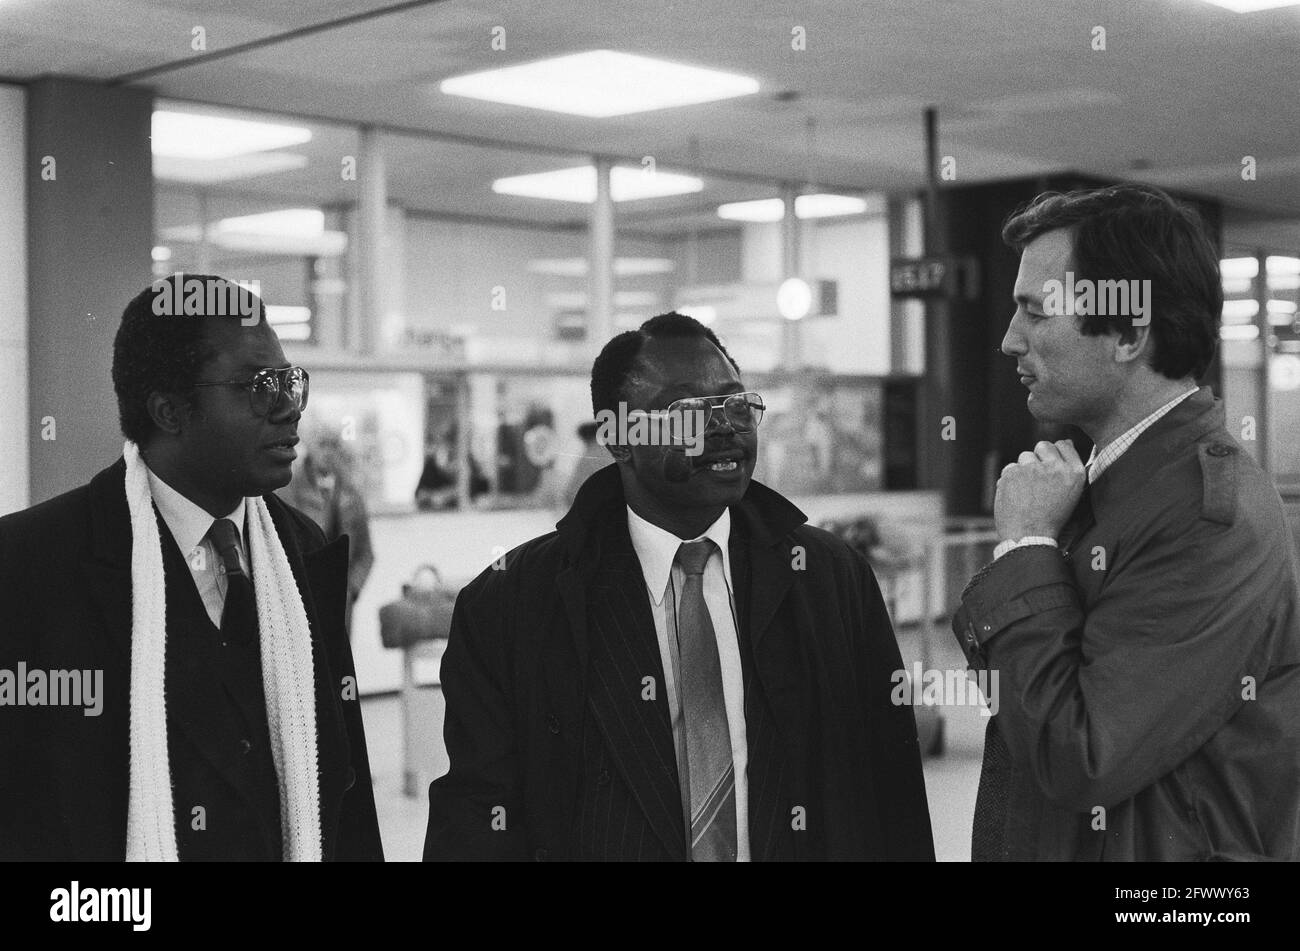 Professor Adebayo Adedeji, coming to give some lectures on the food problem in Africa, is welcomed at Schiphol Airport by J. Verloren van Themaat from the ISS, January 13, 1986, arrival and departure, greetings, professors, The Netherlands, 20th century press agency photo, news to remember, documentary, historic photography 1945-1990, visual stories, human history of the Twentieth Century, capturing moments in time Stock Photo